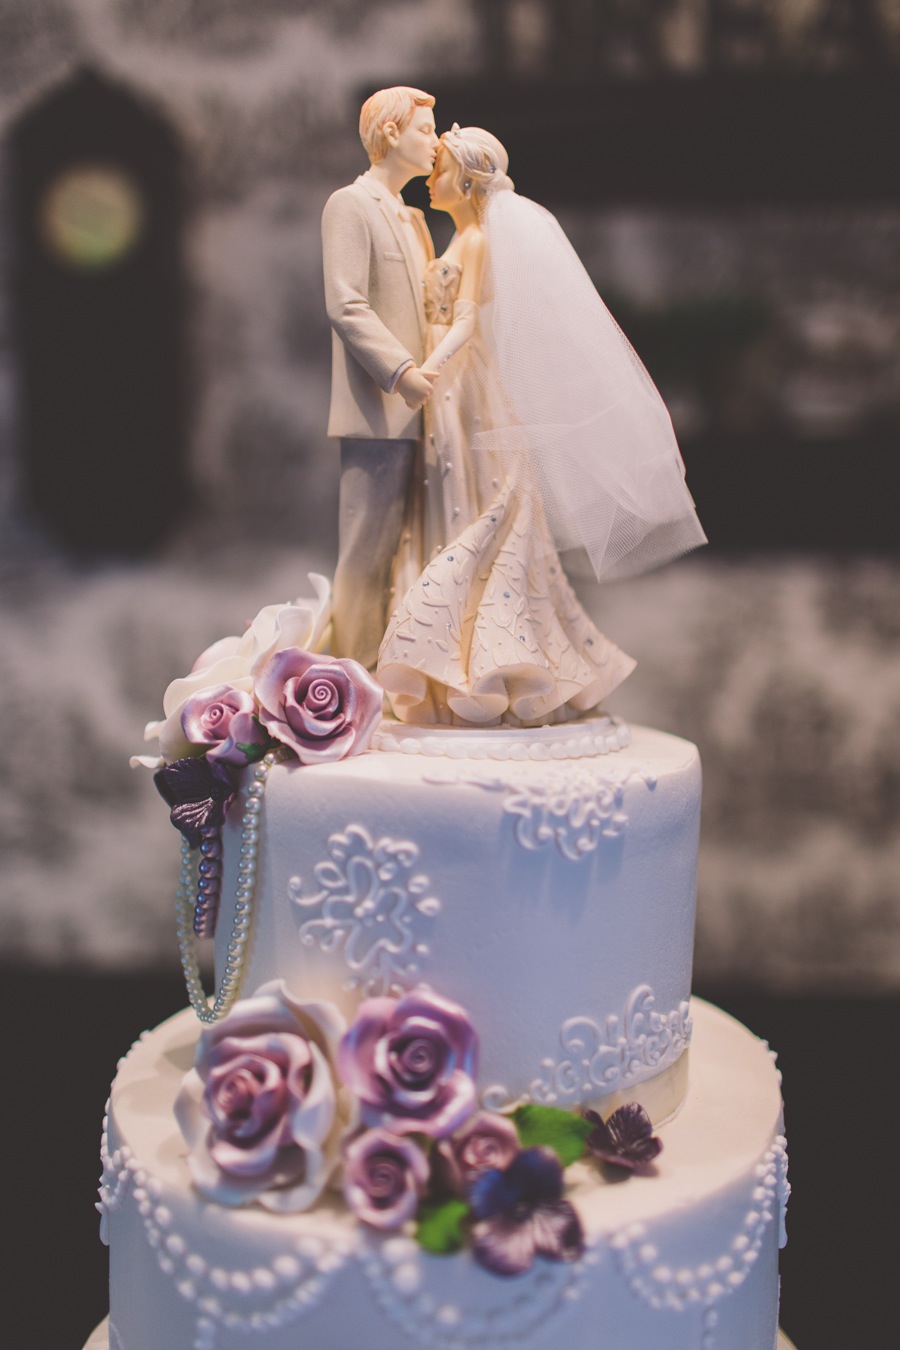 Vintage Wedding Cake with Purple Flowers and Pearls | Alessi Bakeries